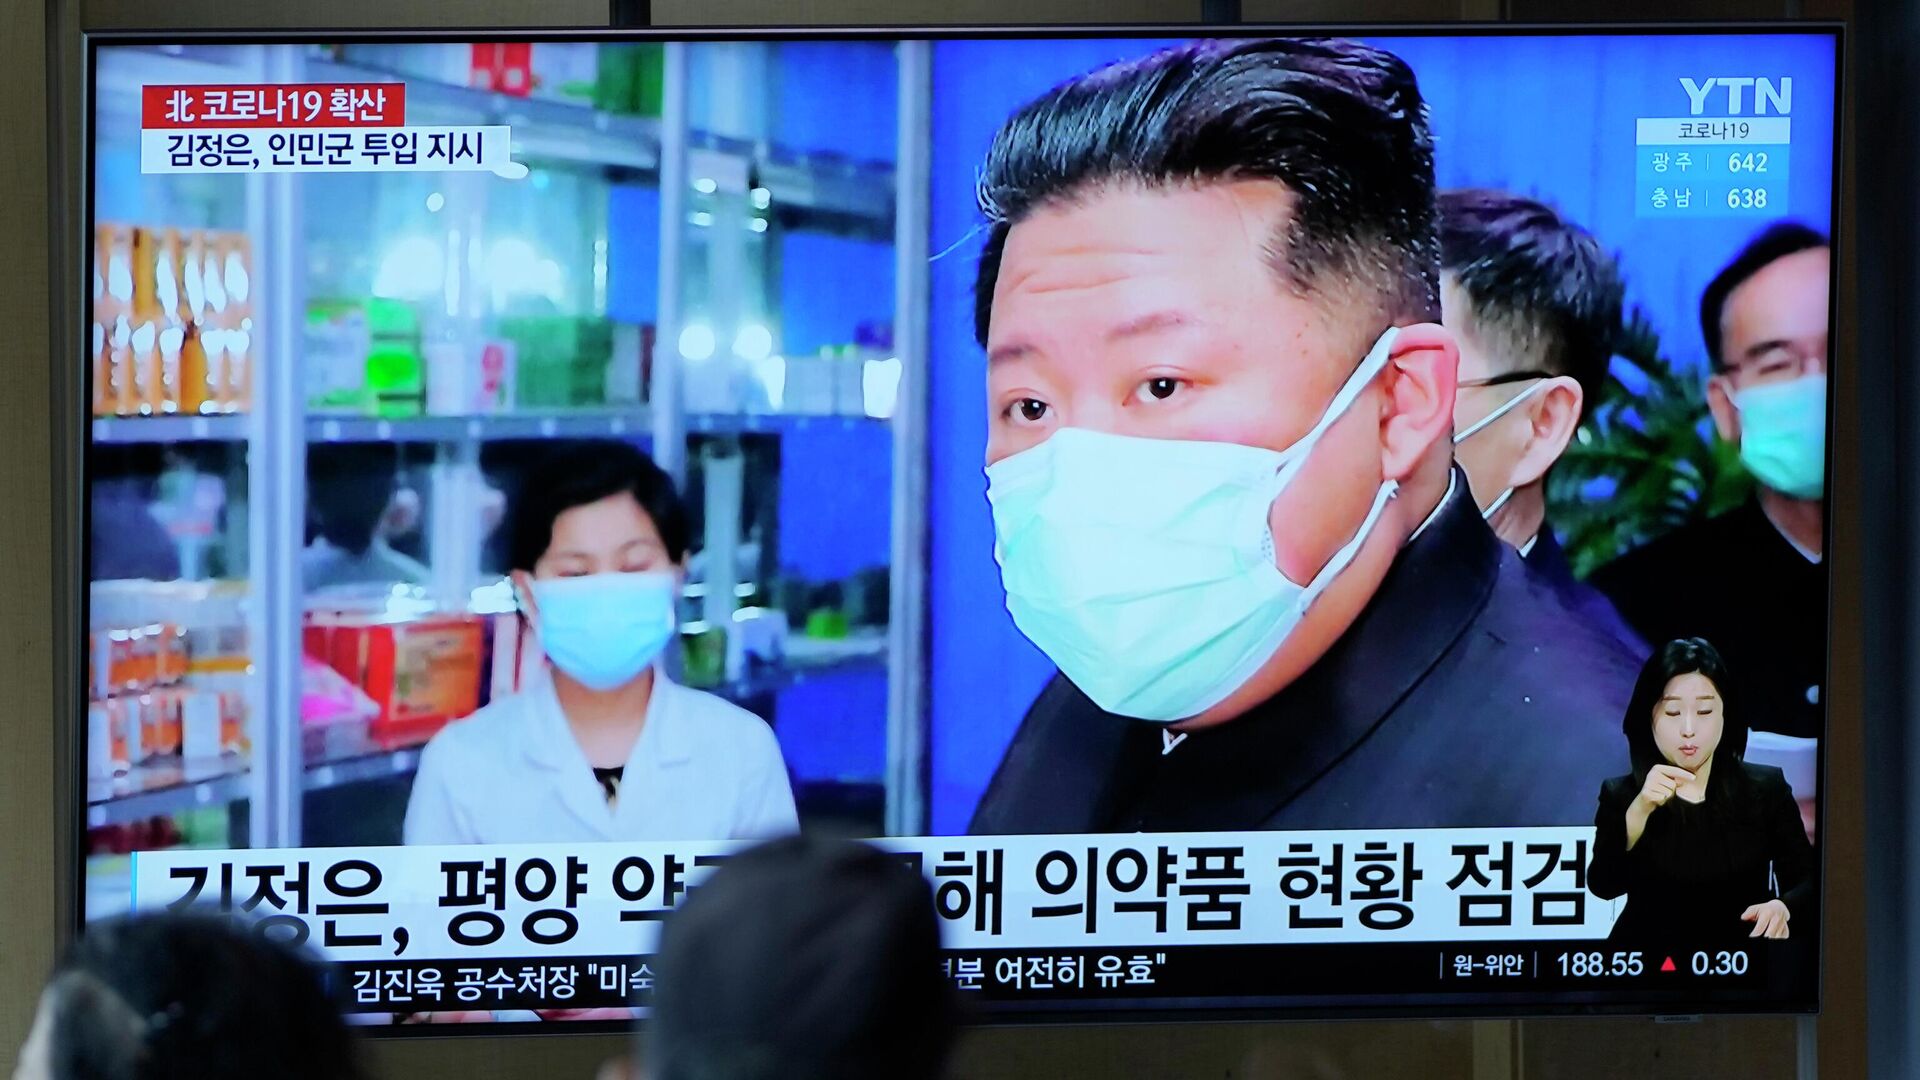 FILE - People watch a TV screen showing a news program reporting with an image of North Korean leader Kim Jong Un, at a train station in Seoul, South Korea on May 16, 2022 - Sputnik International, 1920, 19.06.2022